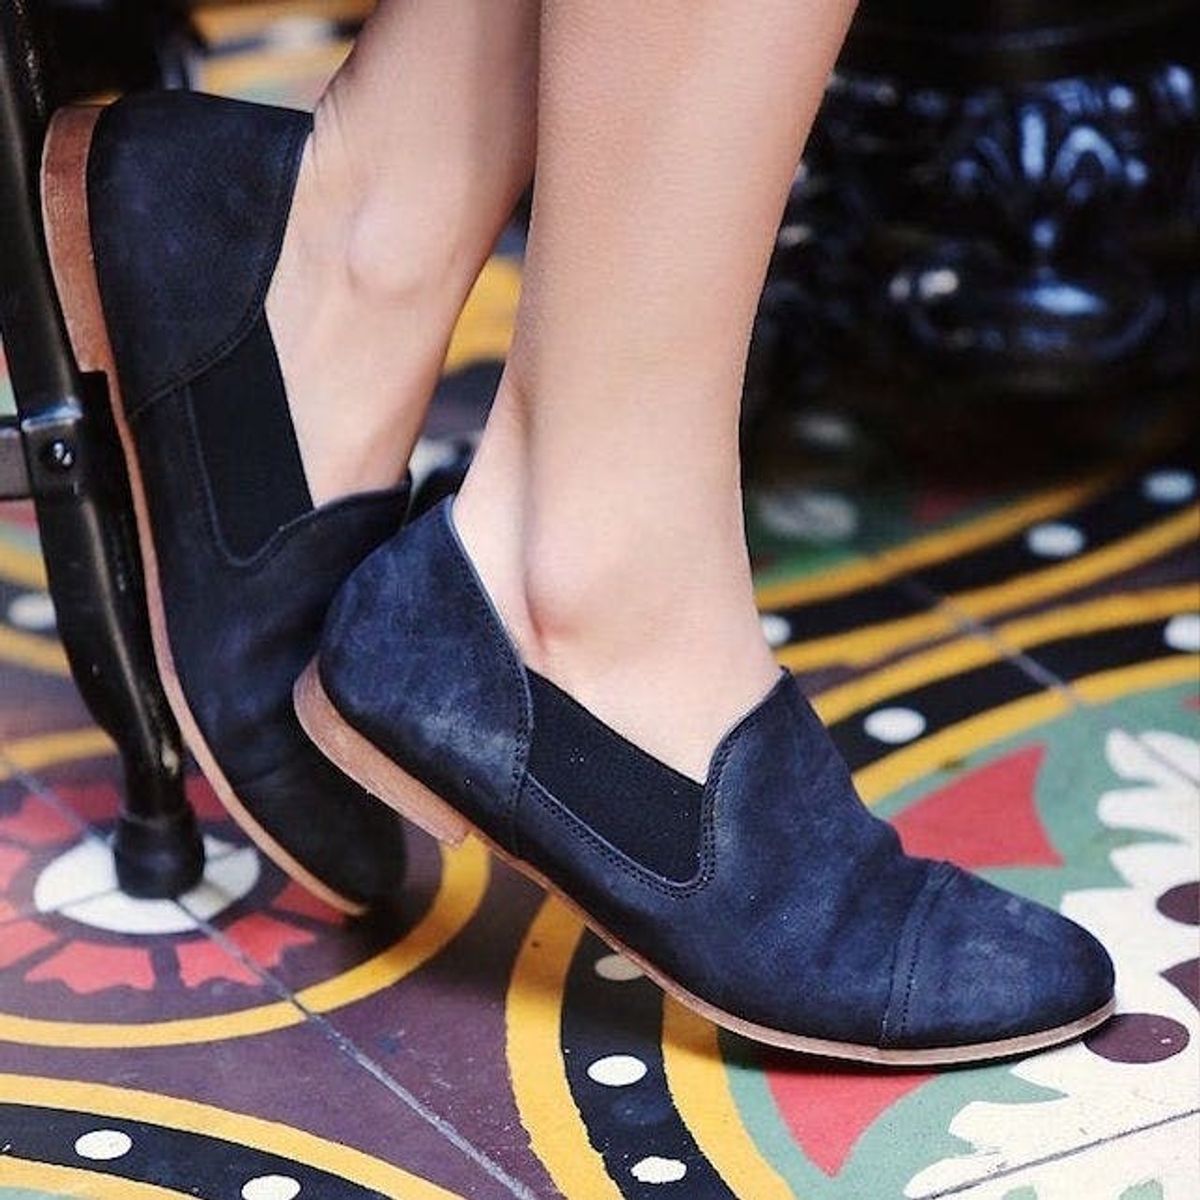 15 Show-Stopping Loafers You Could Wear for a Night Out